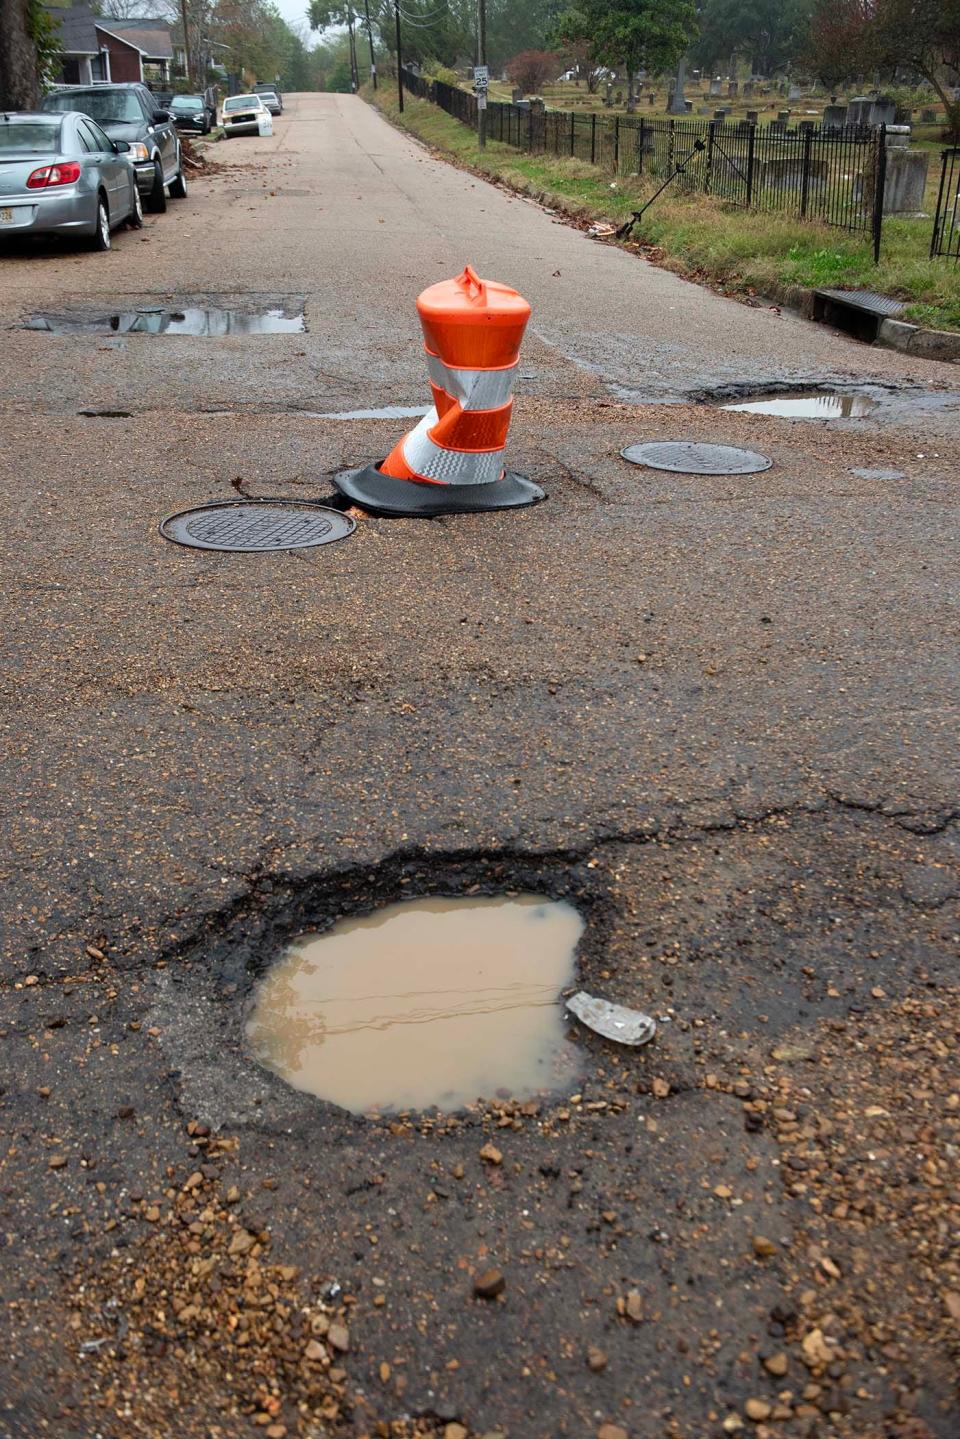 A traffic barrel covering a pothole at Lamar Street in Jackson is surrounded by other potholes at the intersection of North Lamar and Davis Streets on Tuesday.